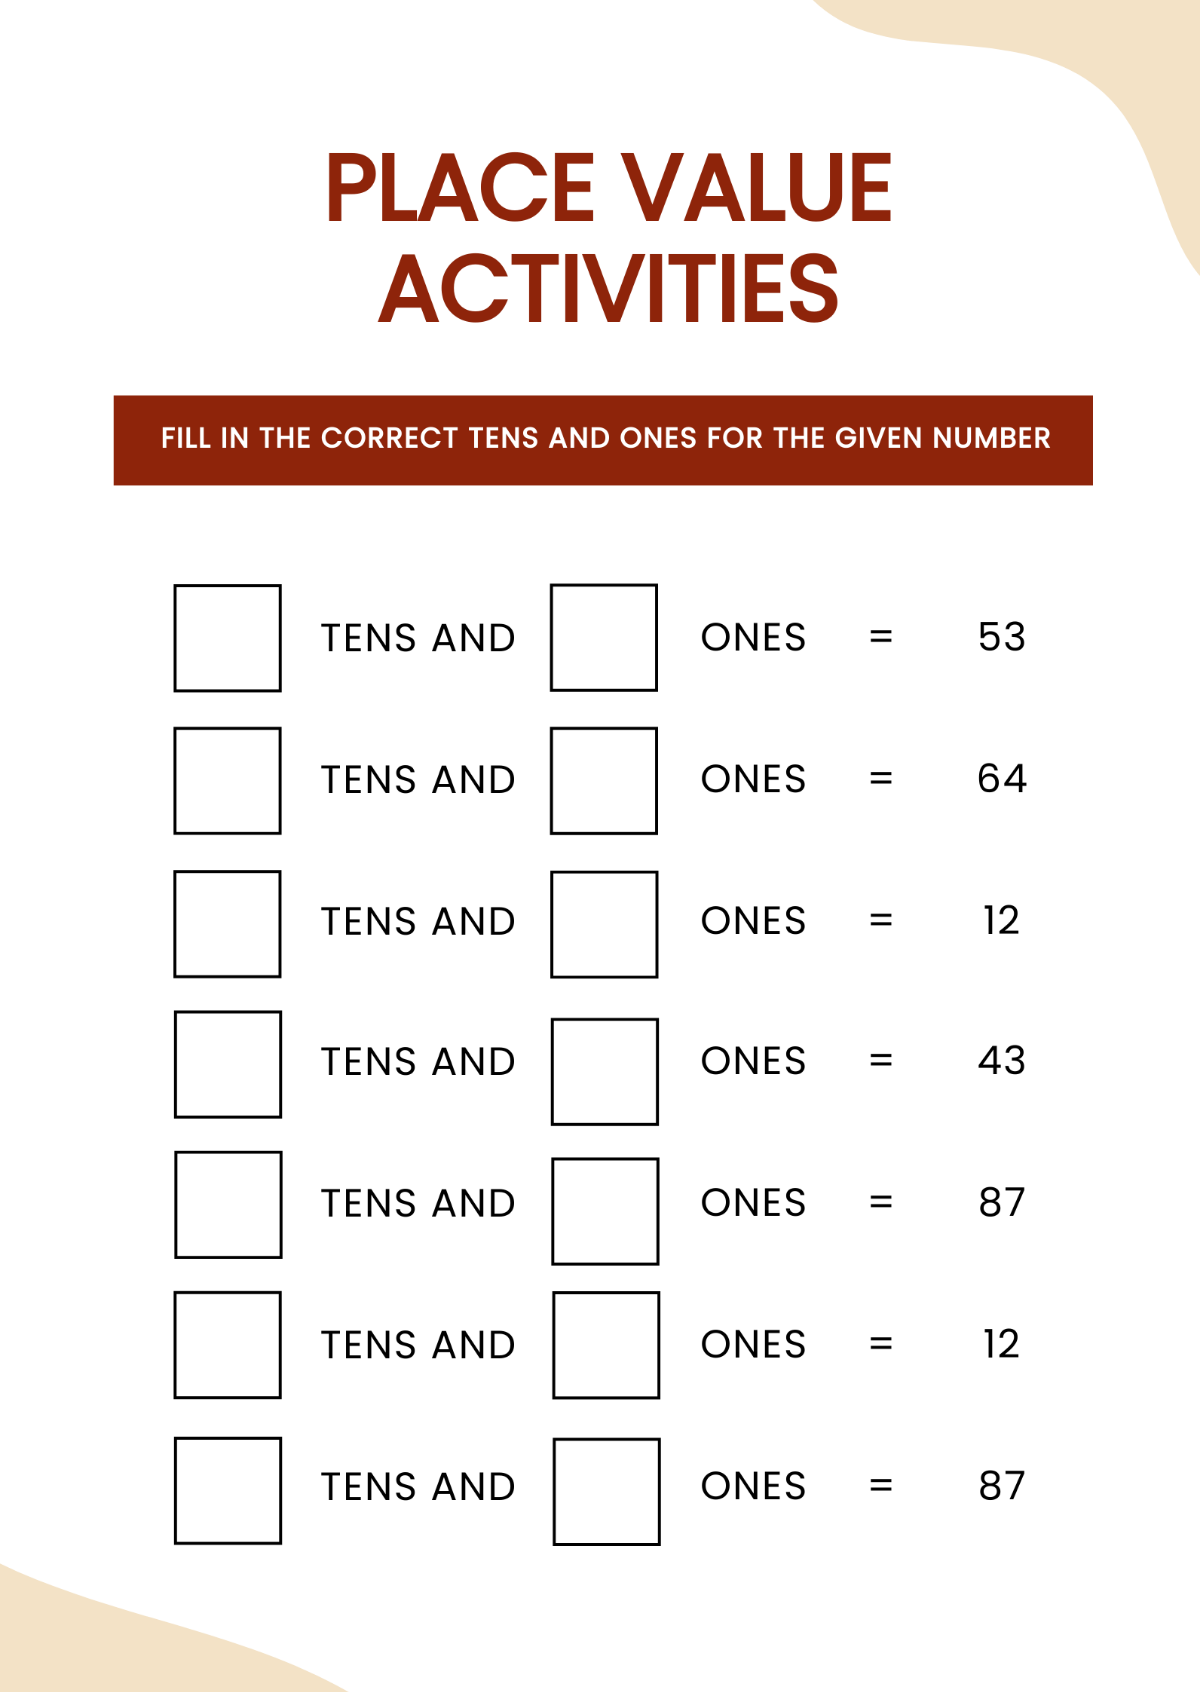 Place Value Activities Chart